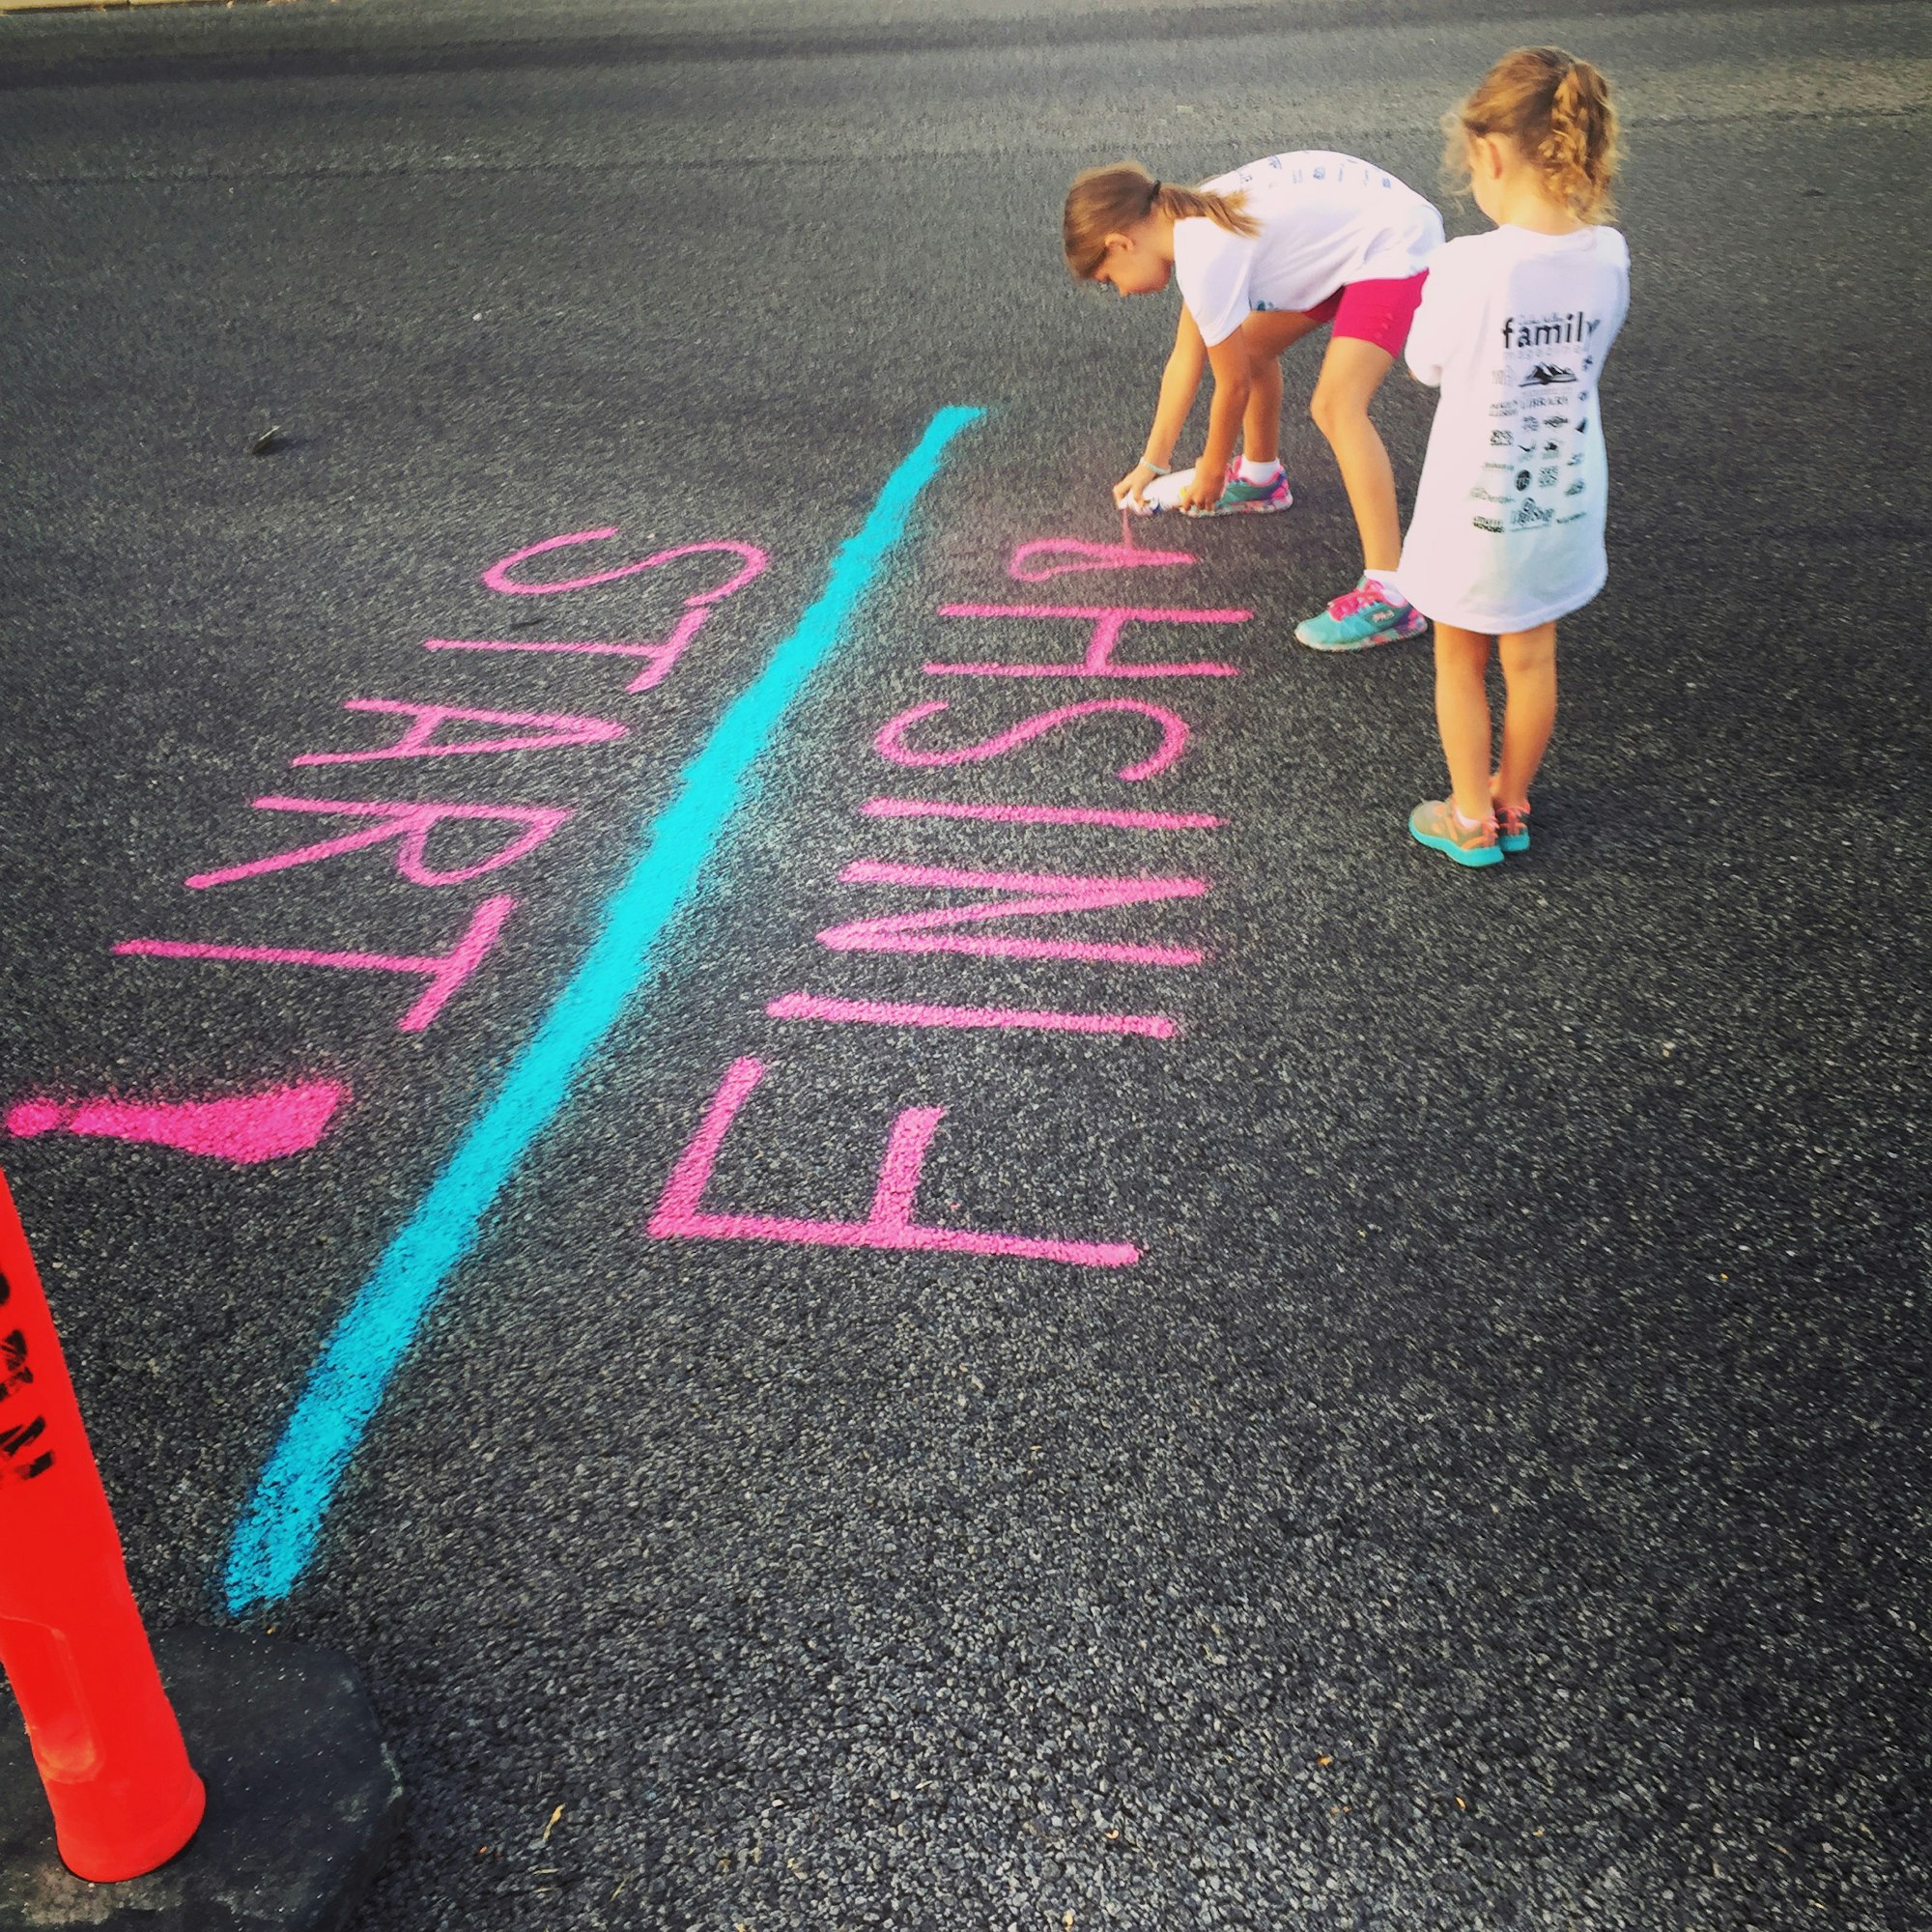 Two young girls mark a start/finish line using bright pink spray paint. Their efforts help get everything ready for a summertime 5k race in northern Utah. 

https://www.instagram.com/AwCreativeUT/

https://www.etsy.com/shop/AwCreativeUT

#AwCreativeUT #awcreative  